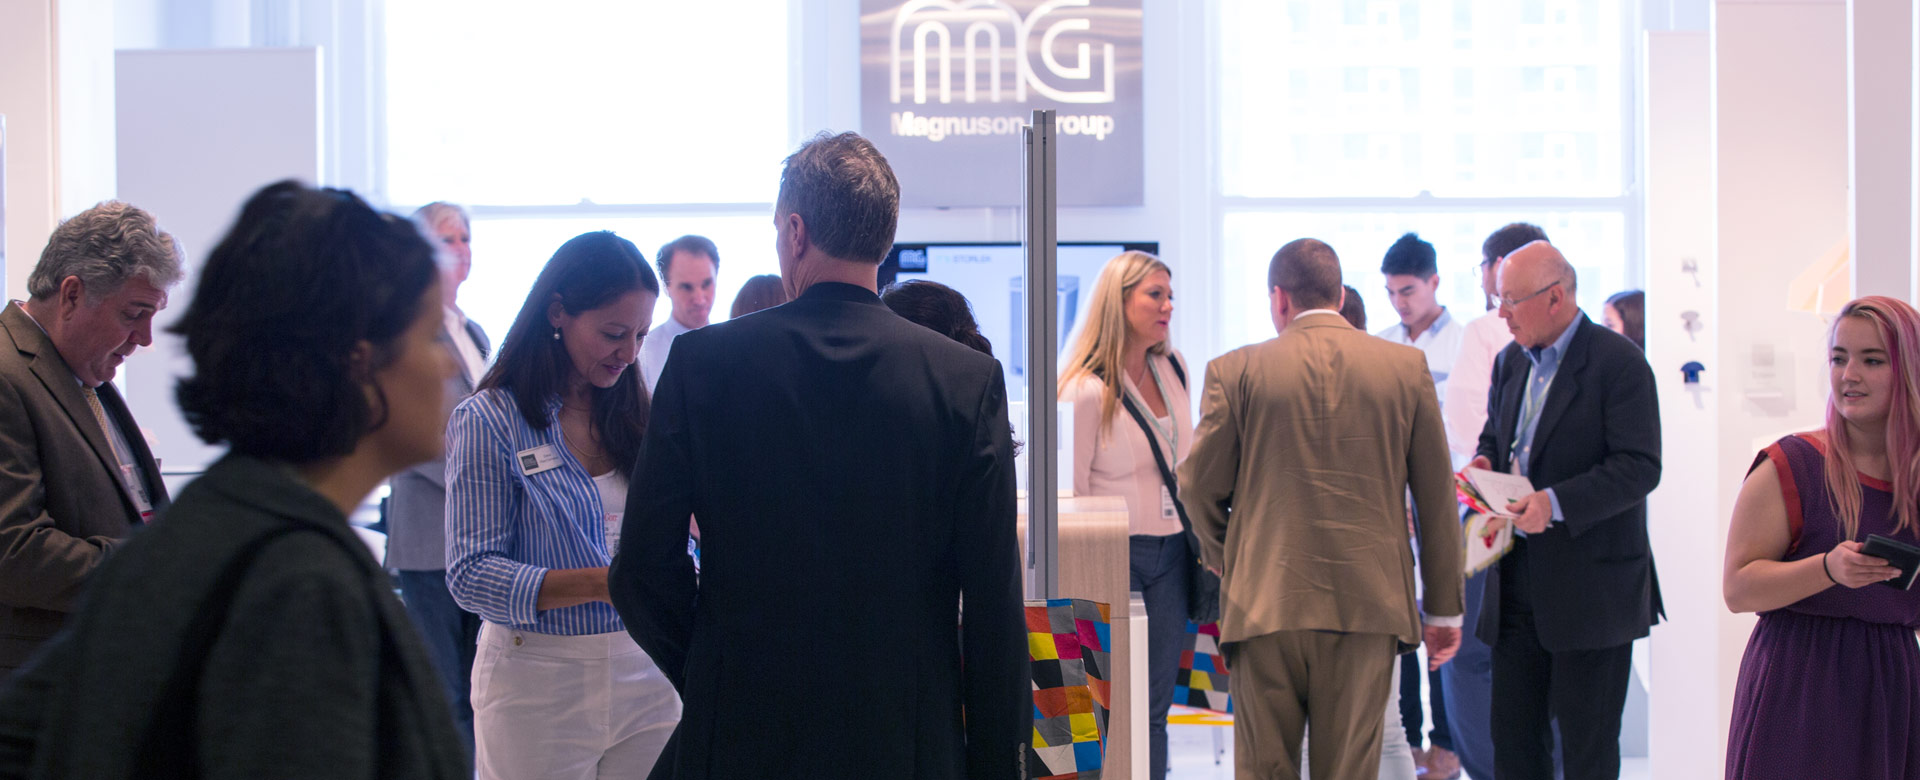 Welcome to Magnuson Group - NeoCon 2015